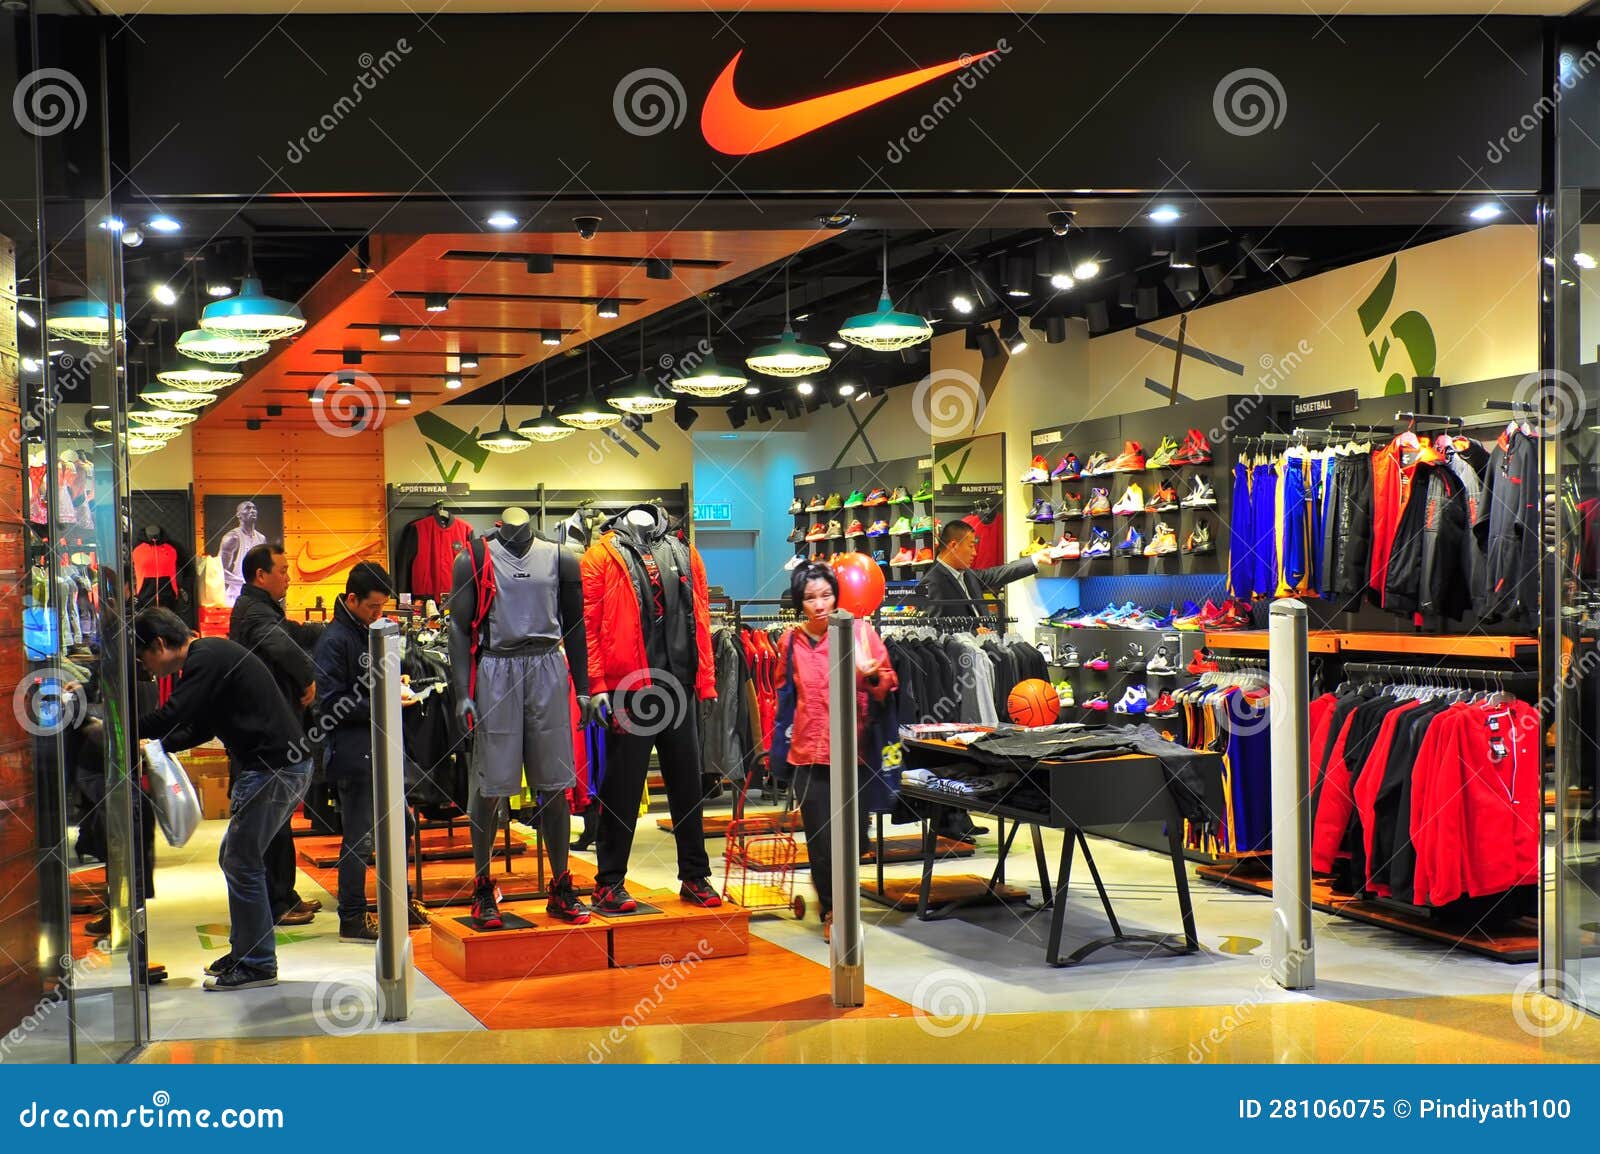 is there a nike store at dolphin mall